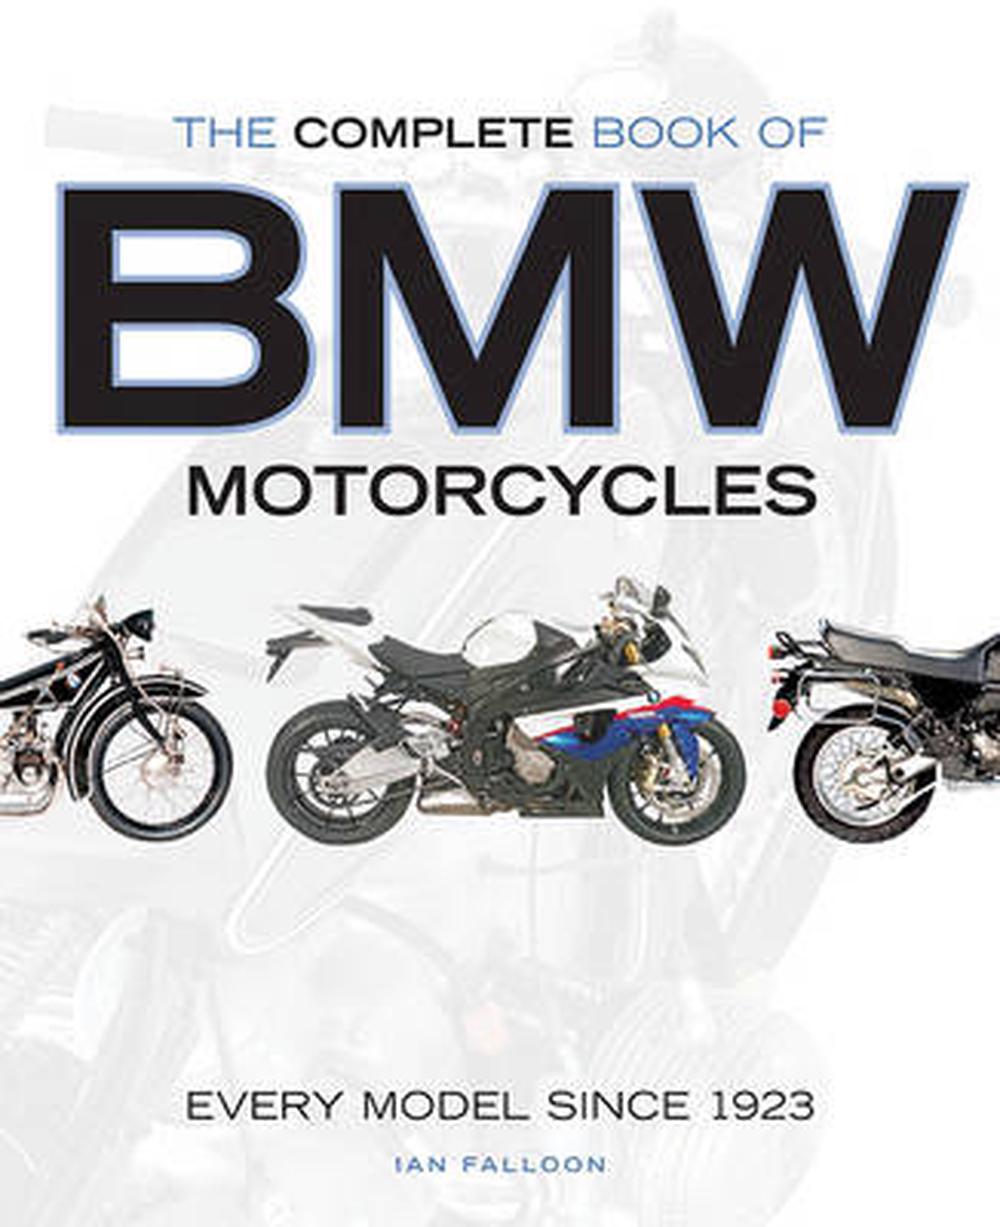 The Complete Book of BMW Motorcycles: Every Model Since 1923 by Ian